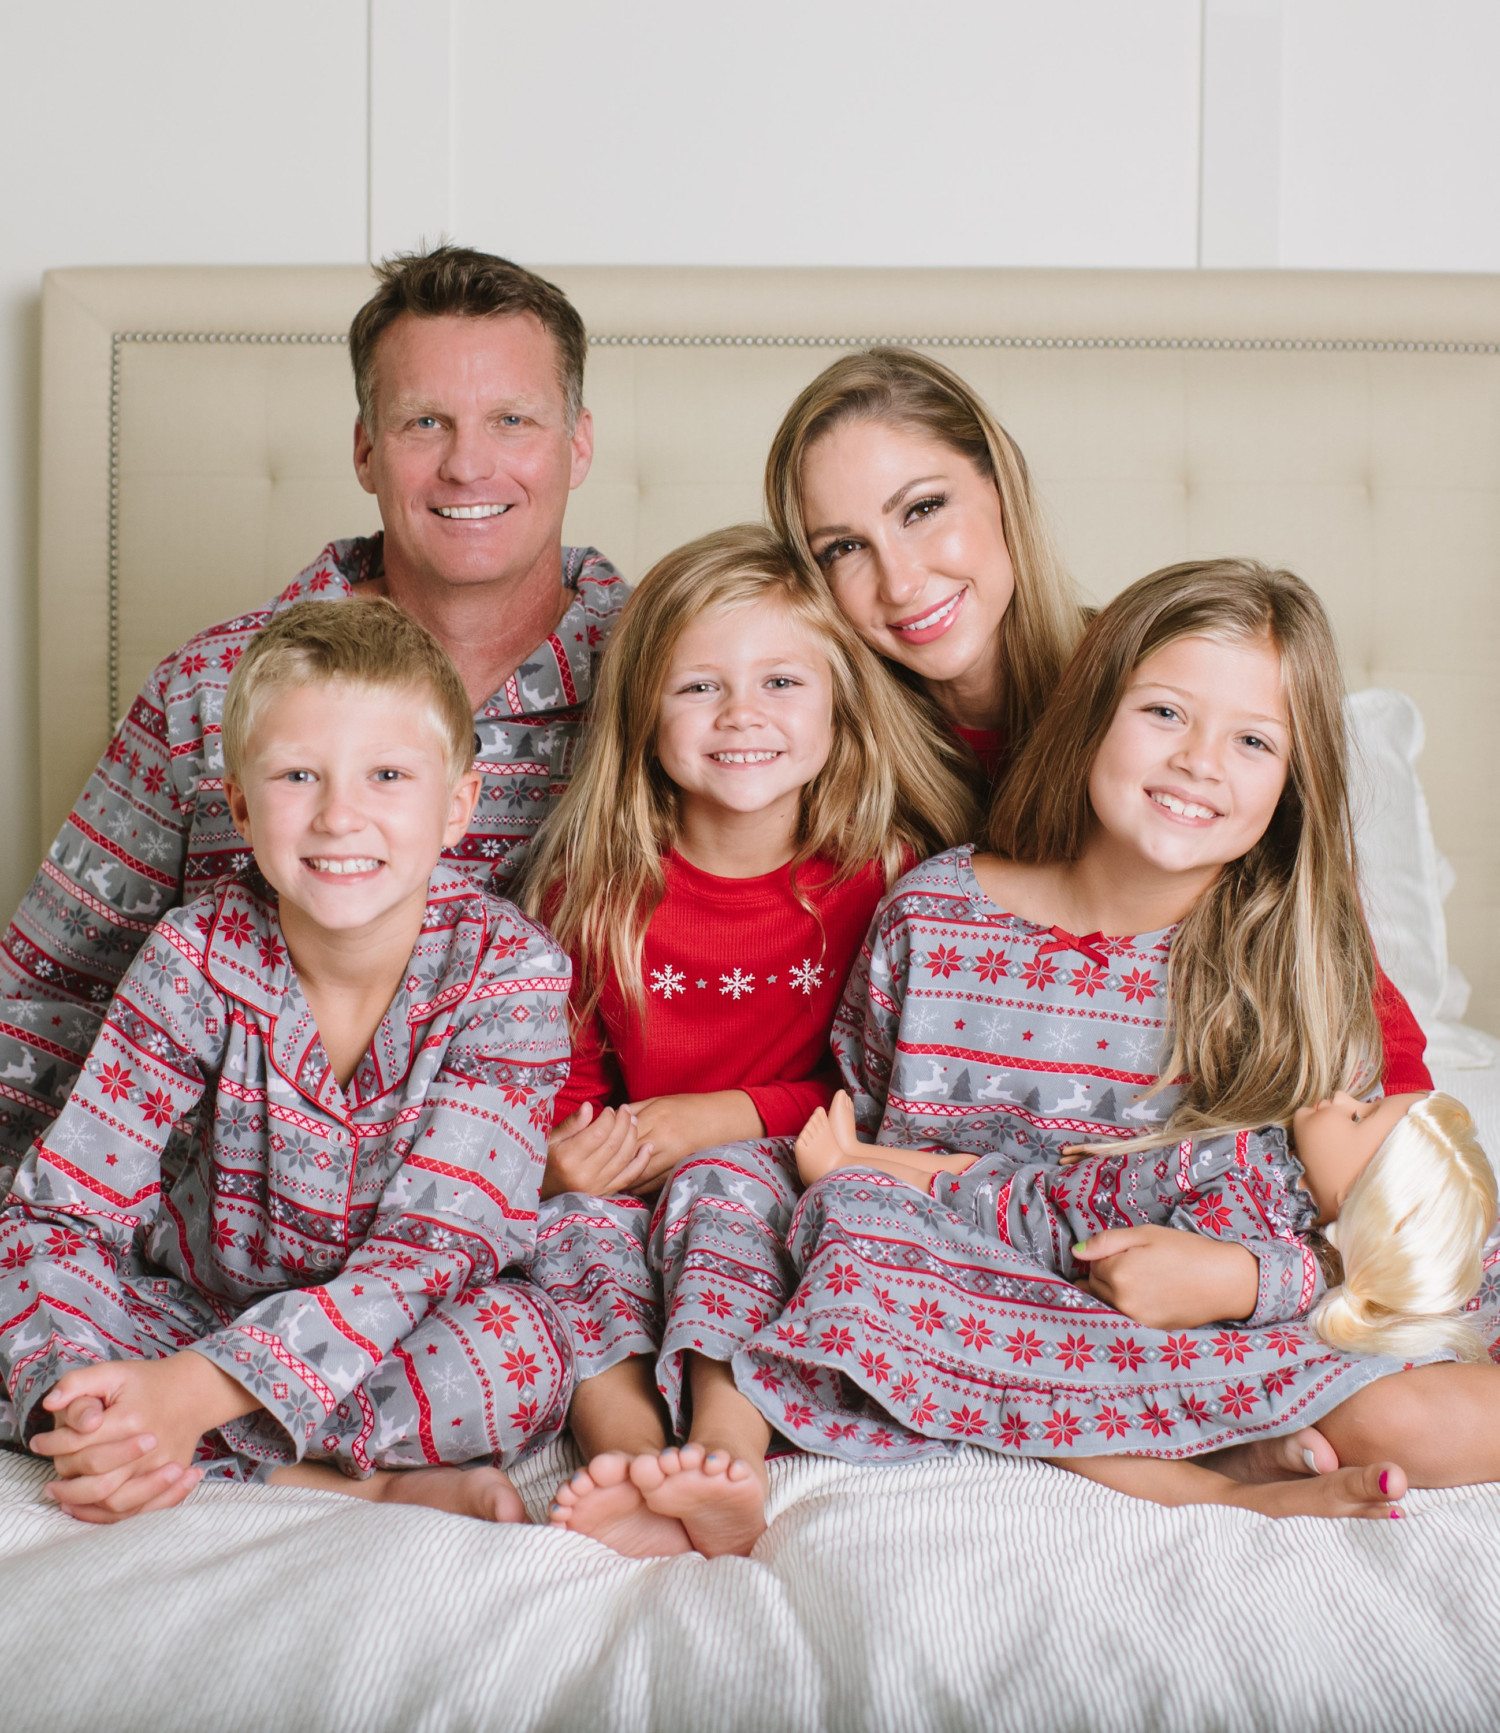 Matching Family Pajamas For The Holidays - Simplemost